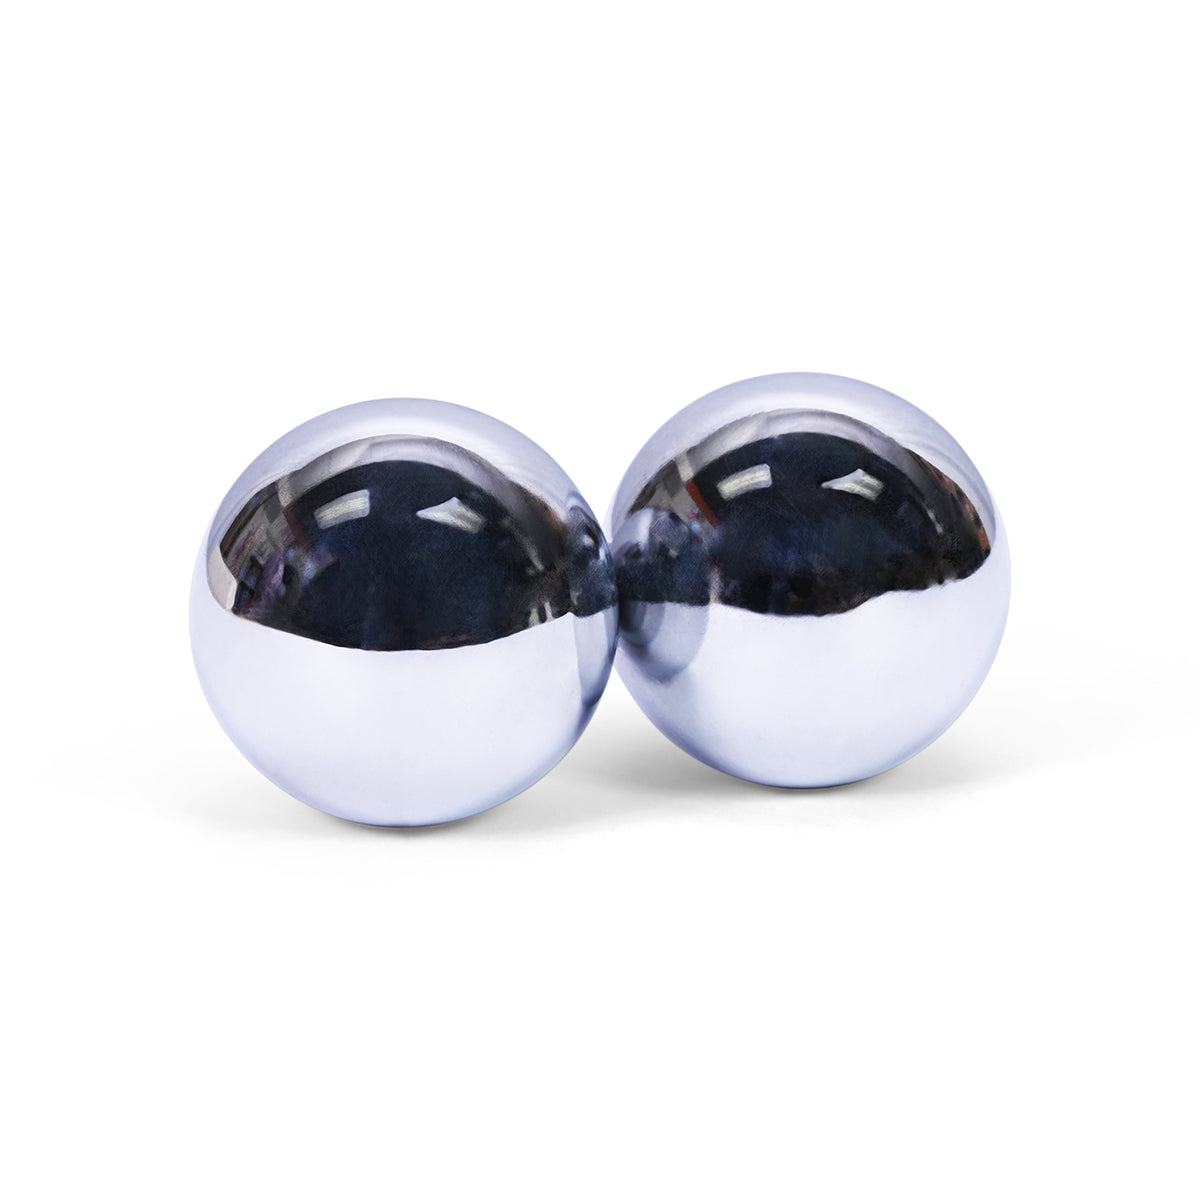 Stainless Steel Exercise Balls, Pair